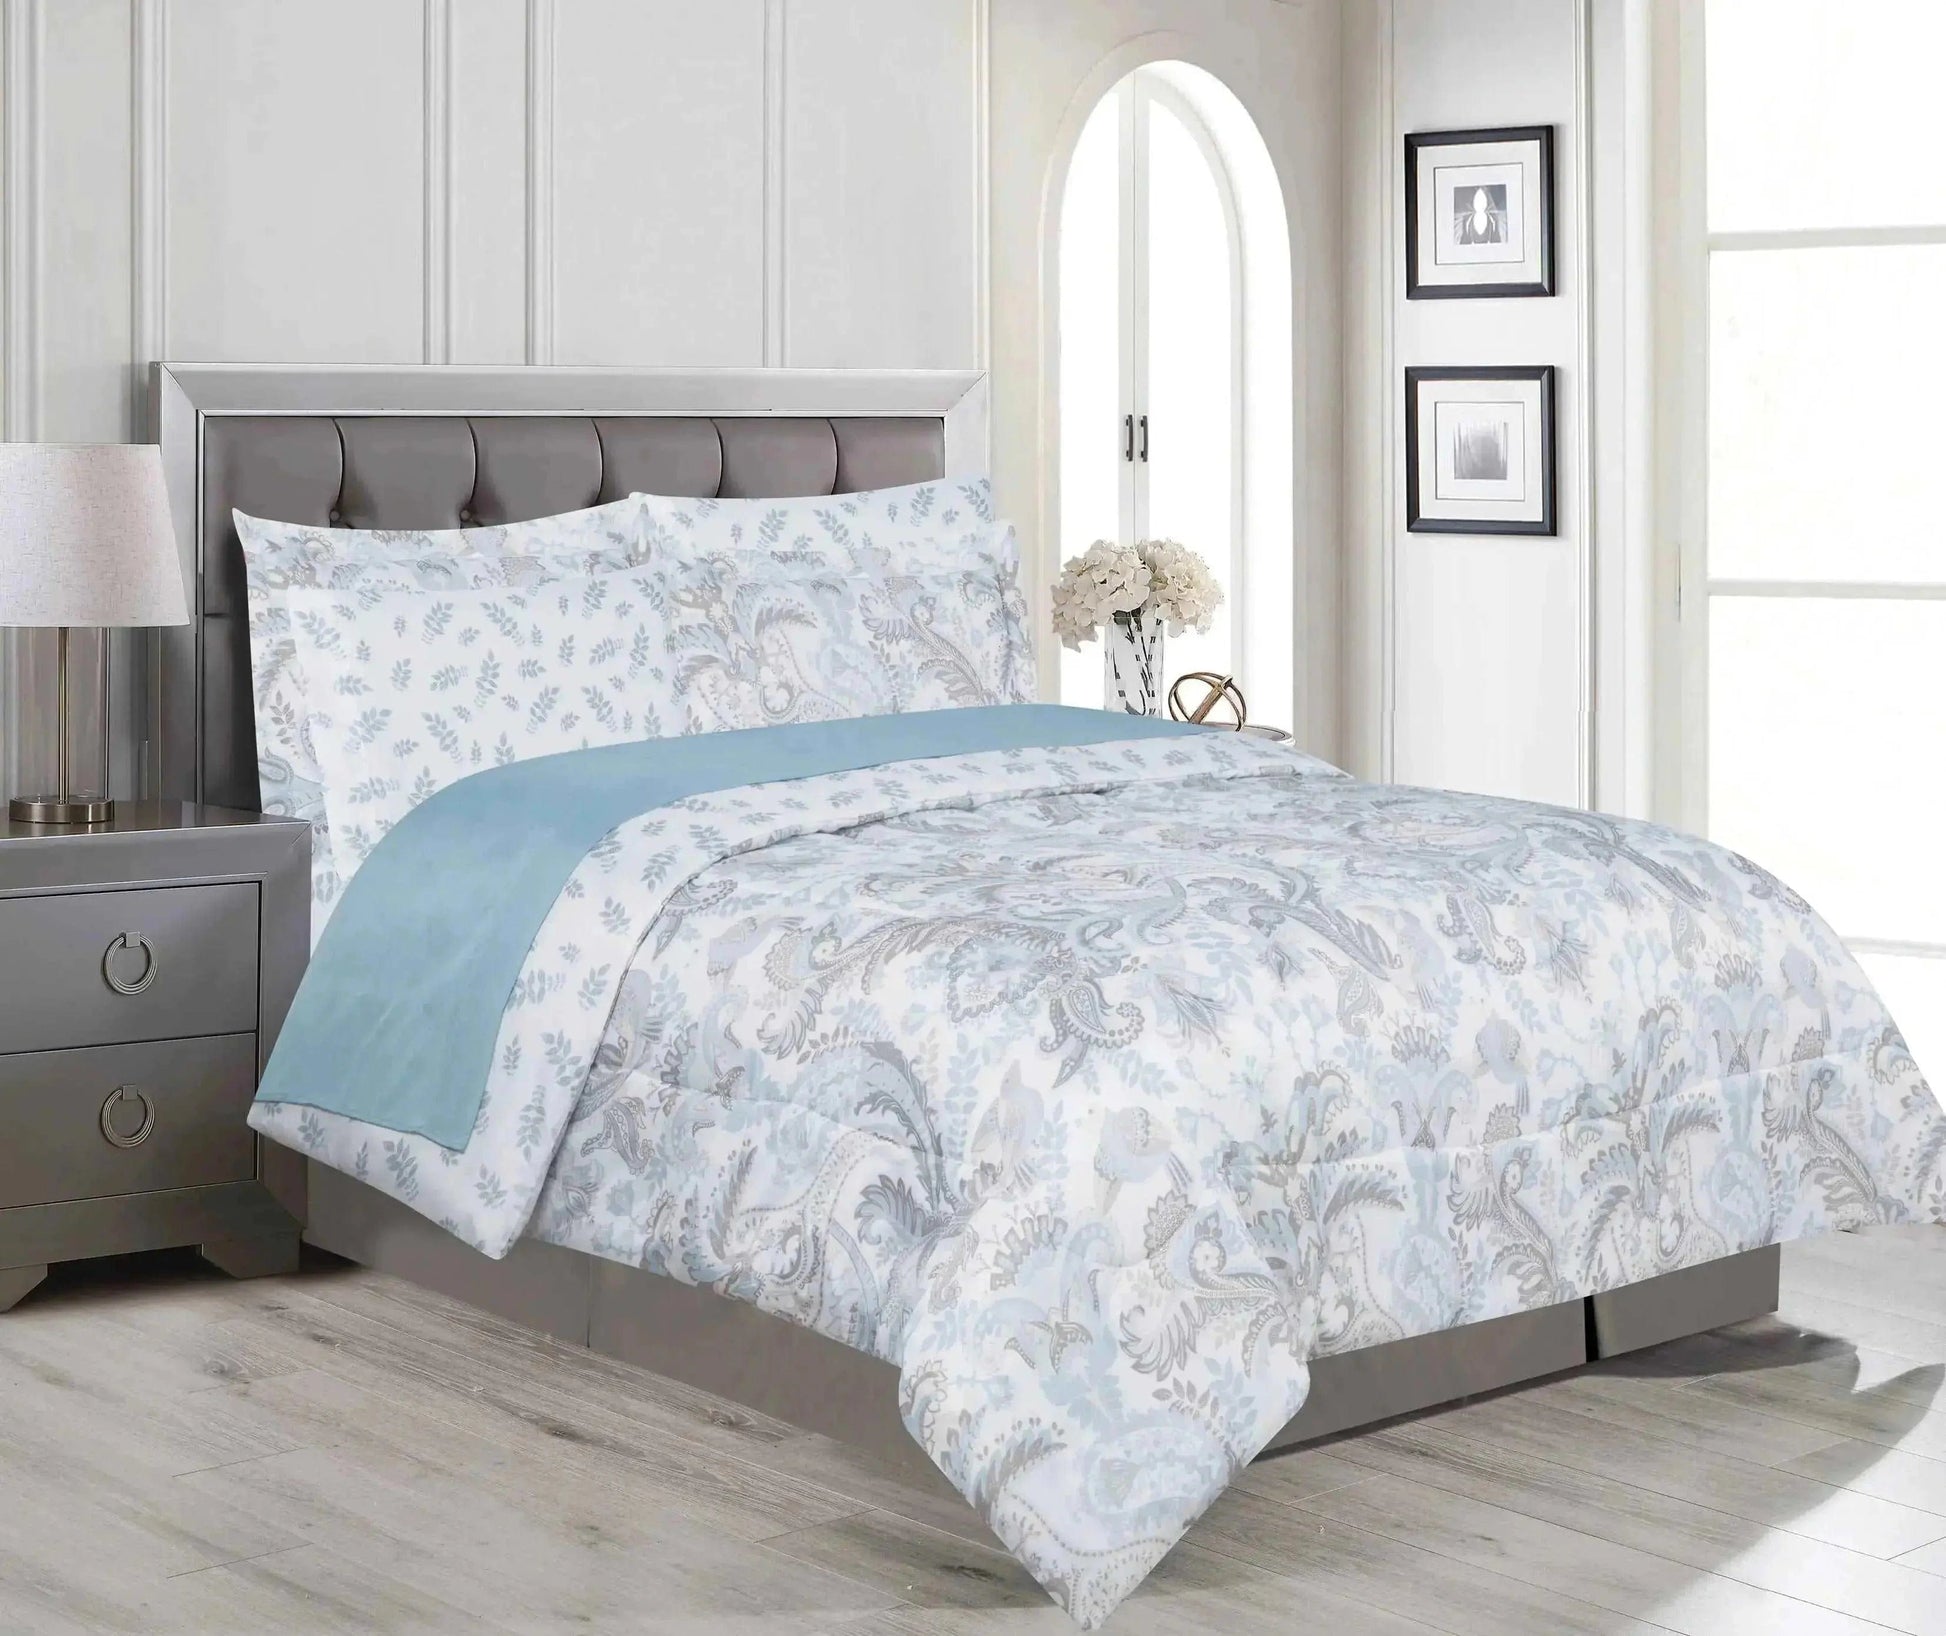 Linen World Comforter Set King / Seymour 7 Piece Bed in a Bag King or Queen Sized